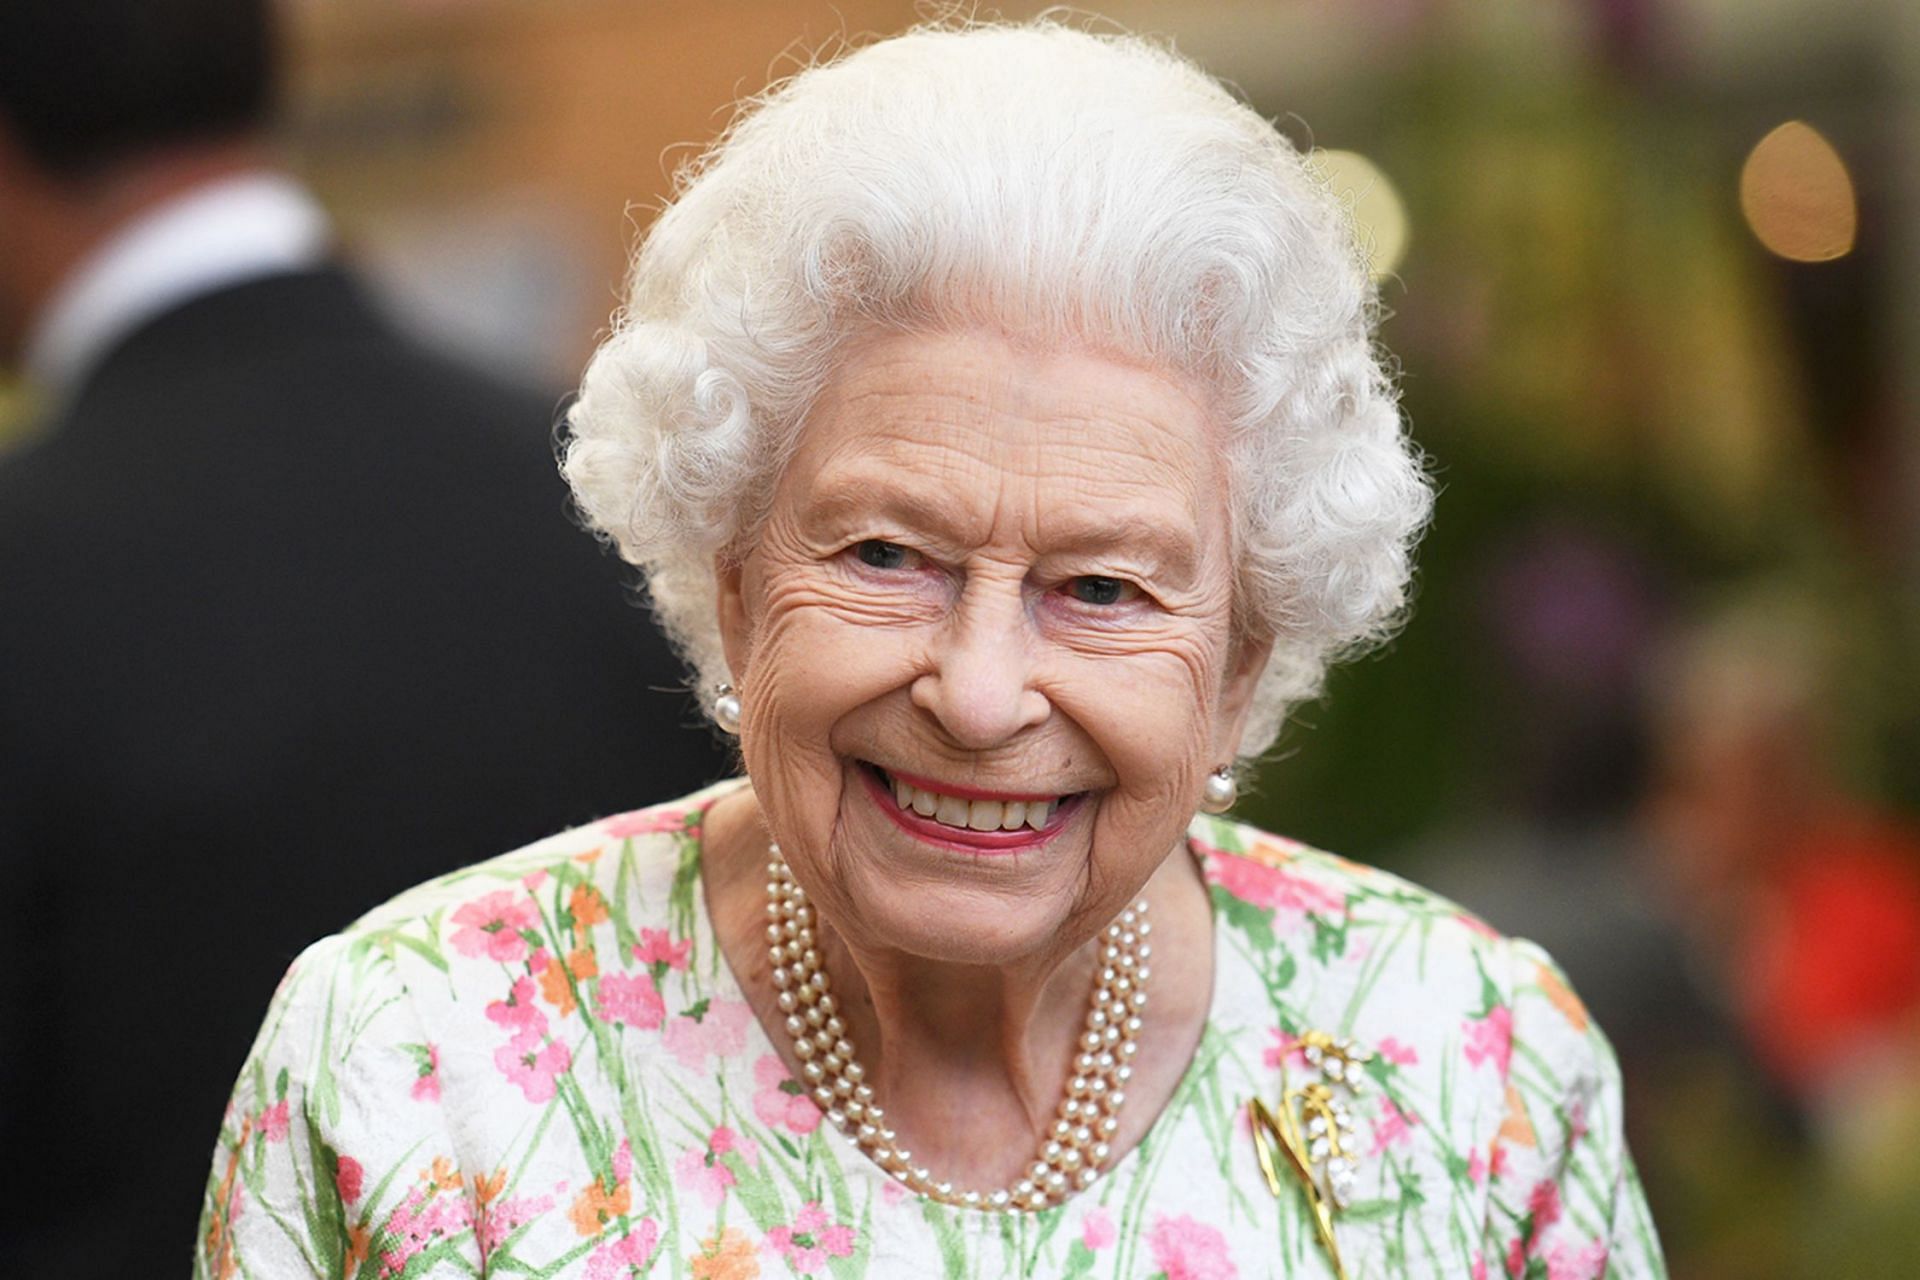 Queen Elizabeth II tests positive for COVID (Image via Oli Scarff/WPA Pool/Getty Images)